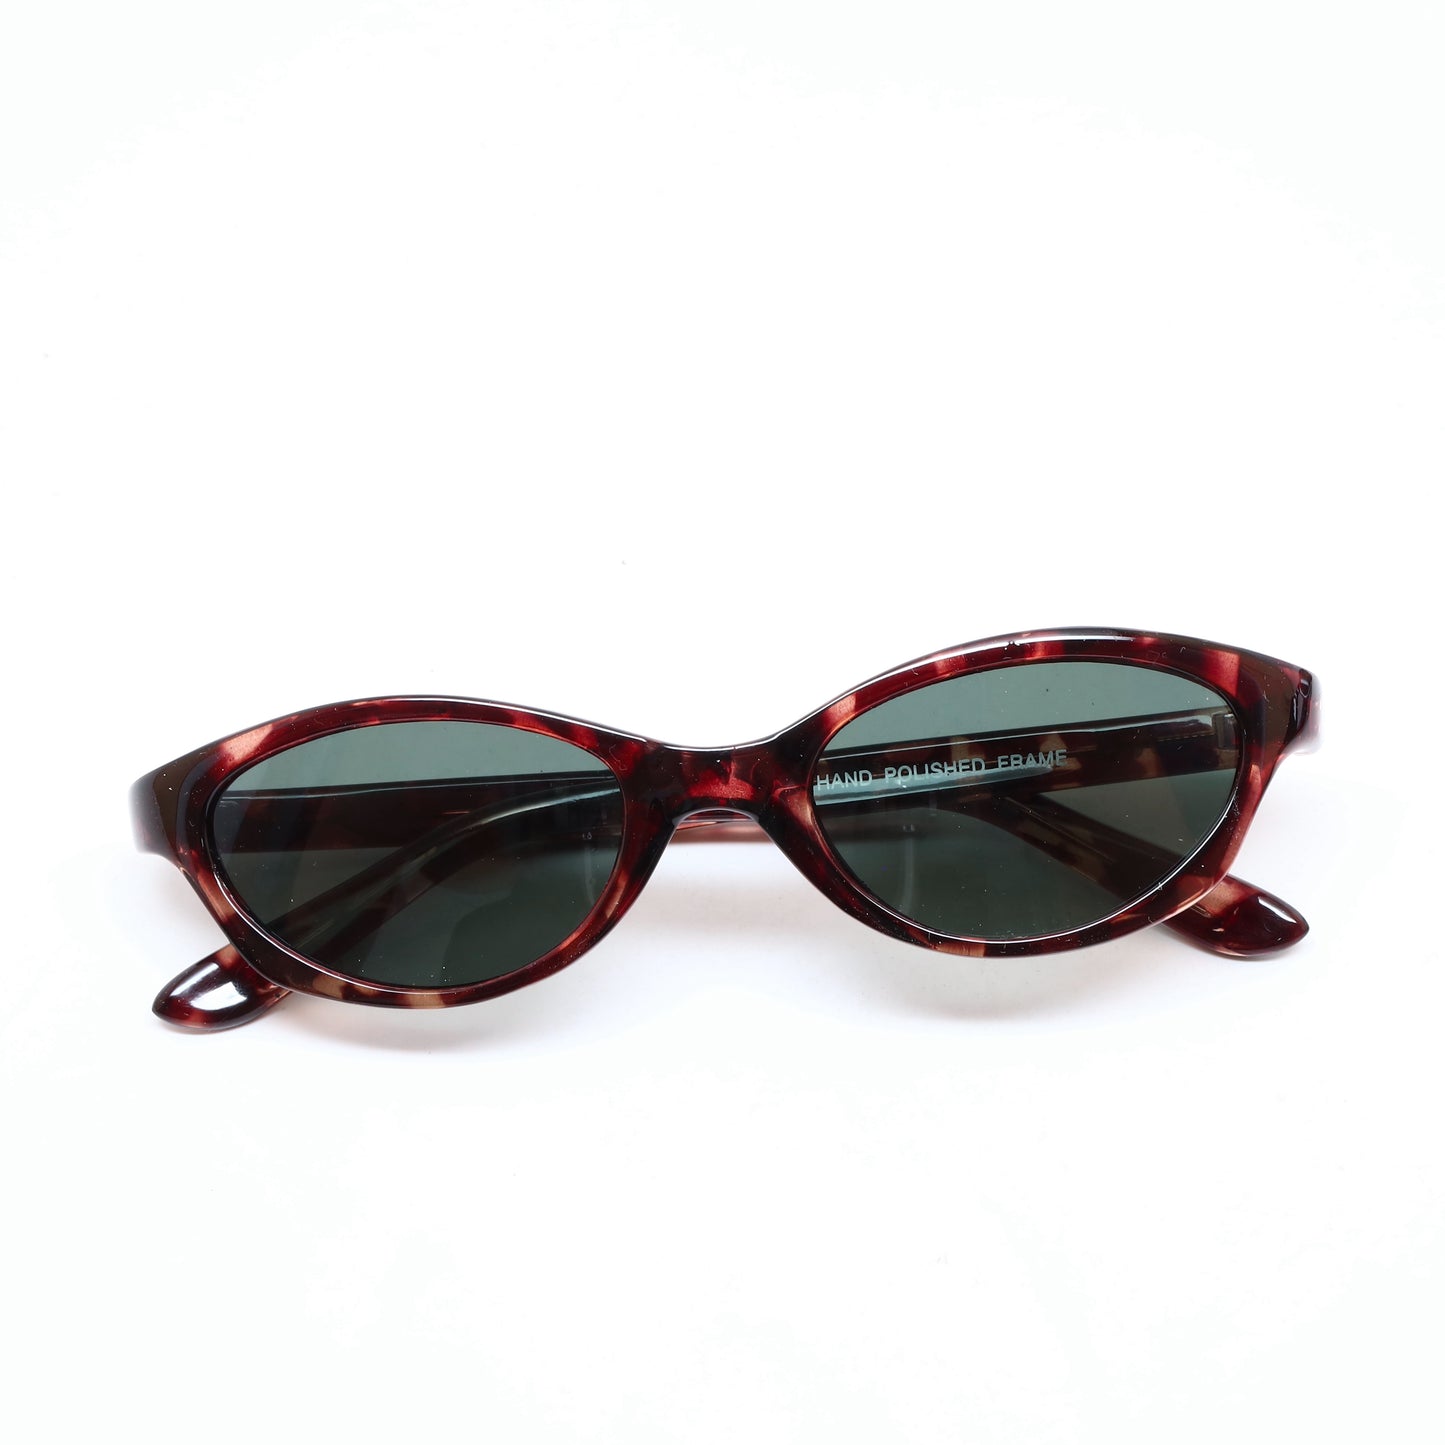 //Style 69// Deluxe Vintage 90s Deadstock Chic Angled Oval Sunglasses - Tortoise